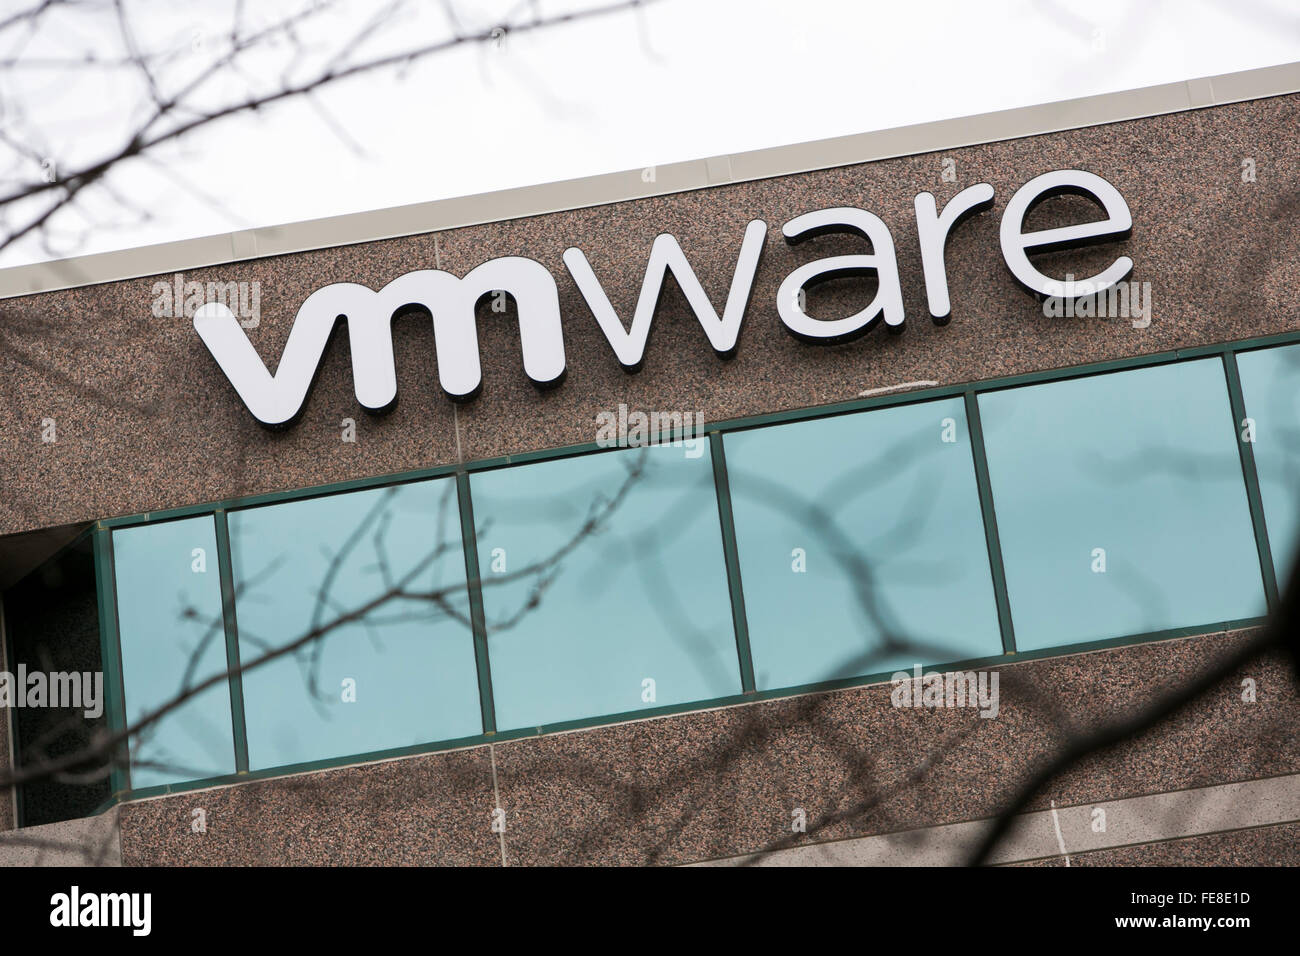 A logo sign outside of an office building occupied by VMware, Inc., in Reston, Virginia on January 1, 2016. Stock Photo